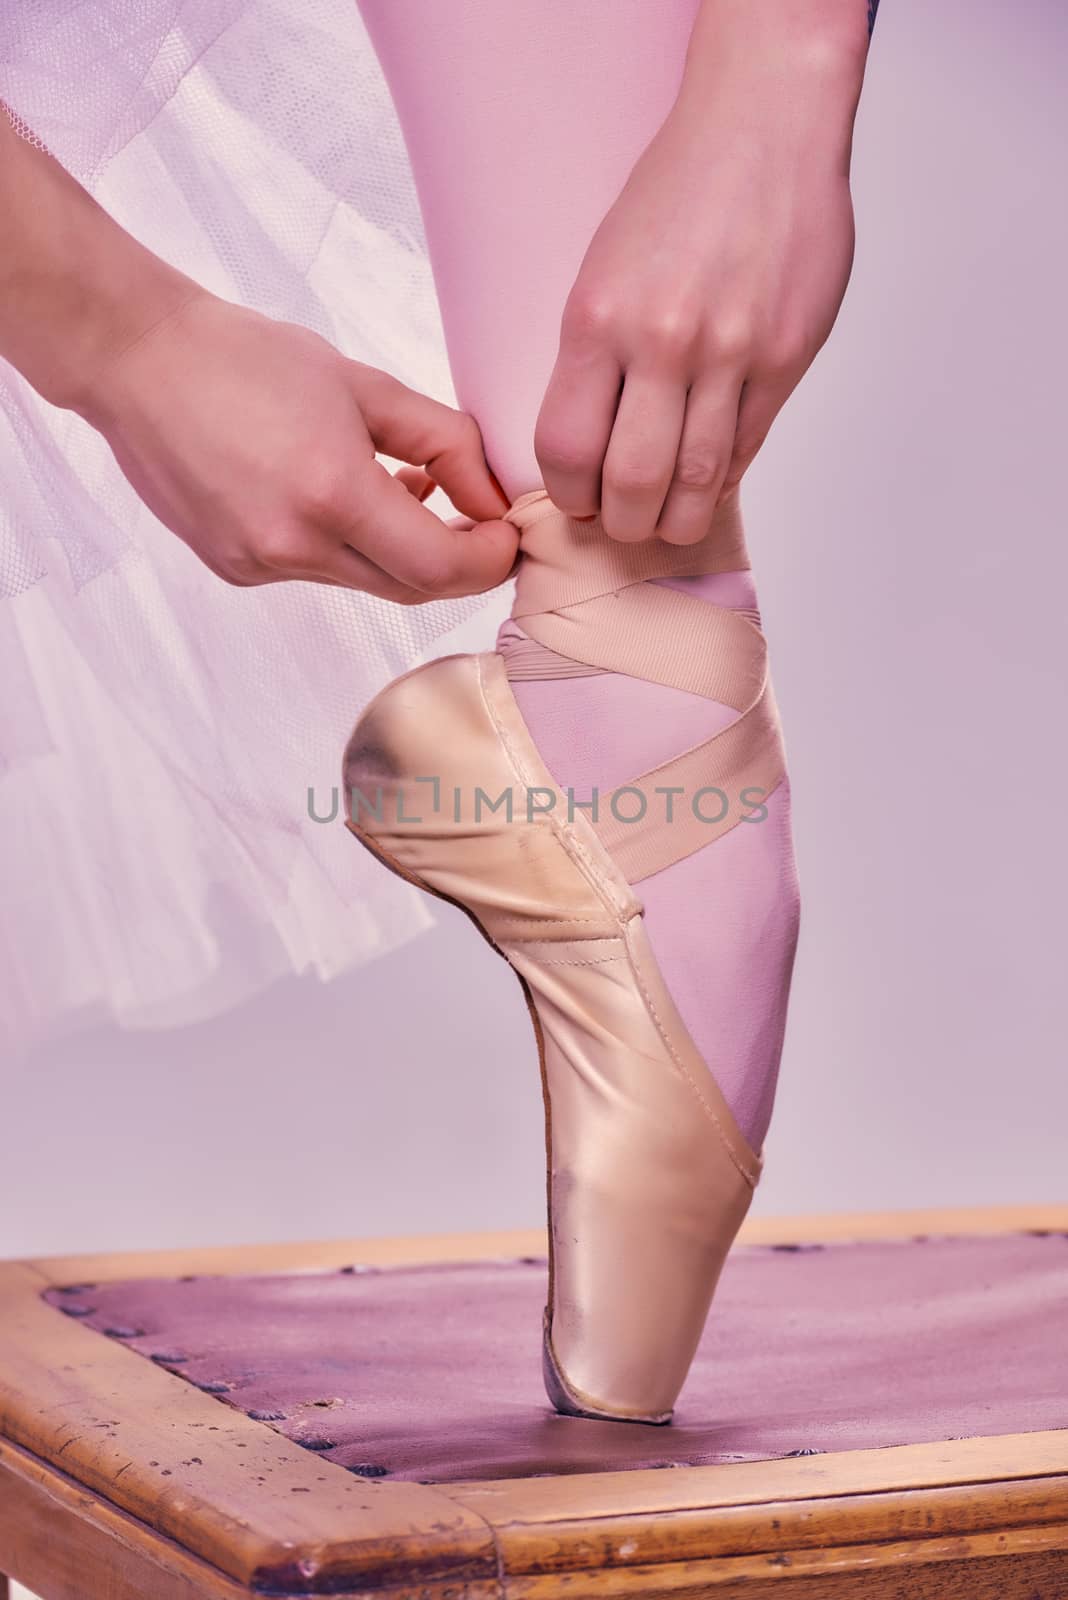 Professional ballerina putting on her ballet shoes.on the  wooden chair on a pink background. feet close-up